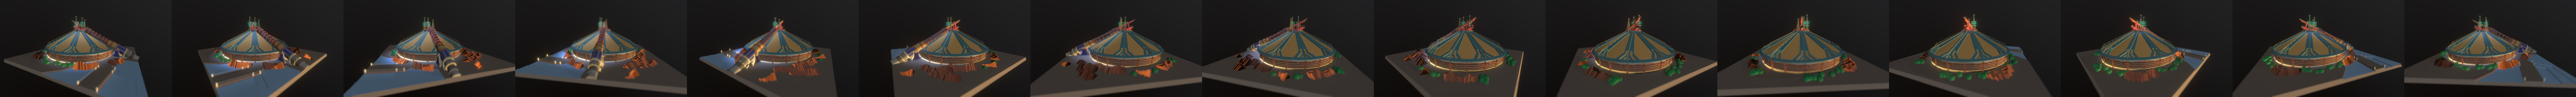 space mountain 3d model